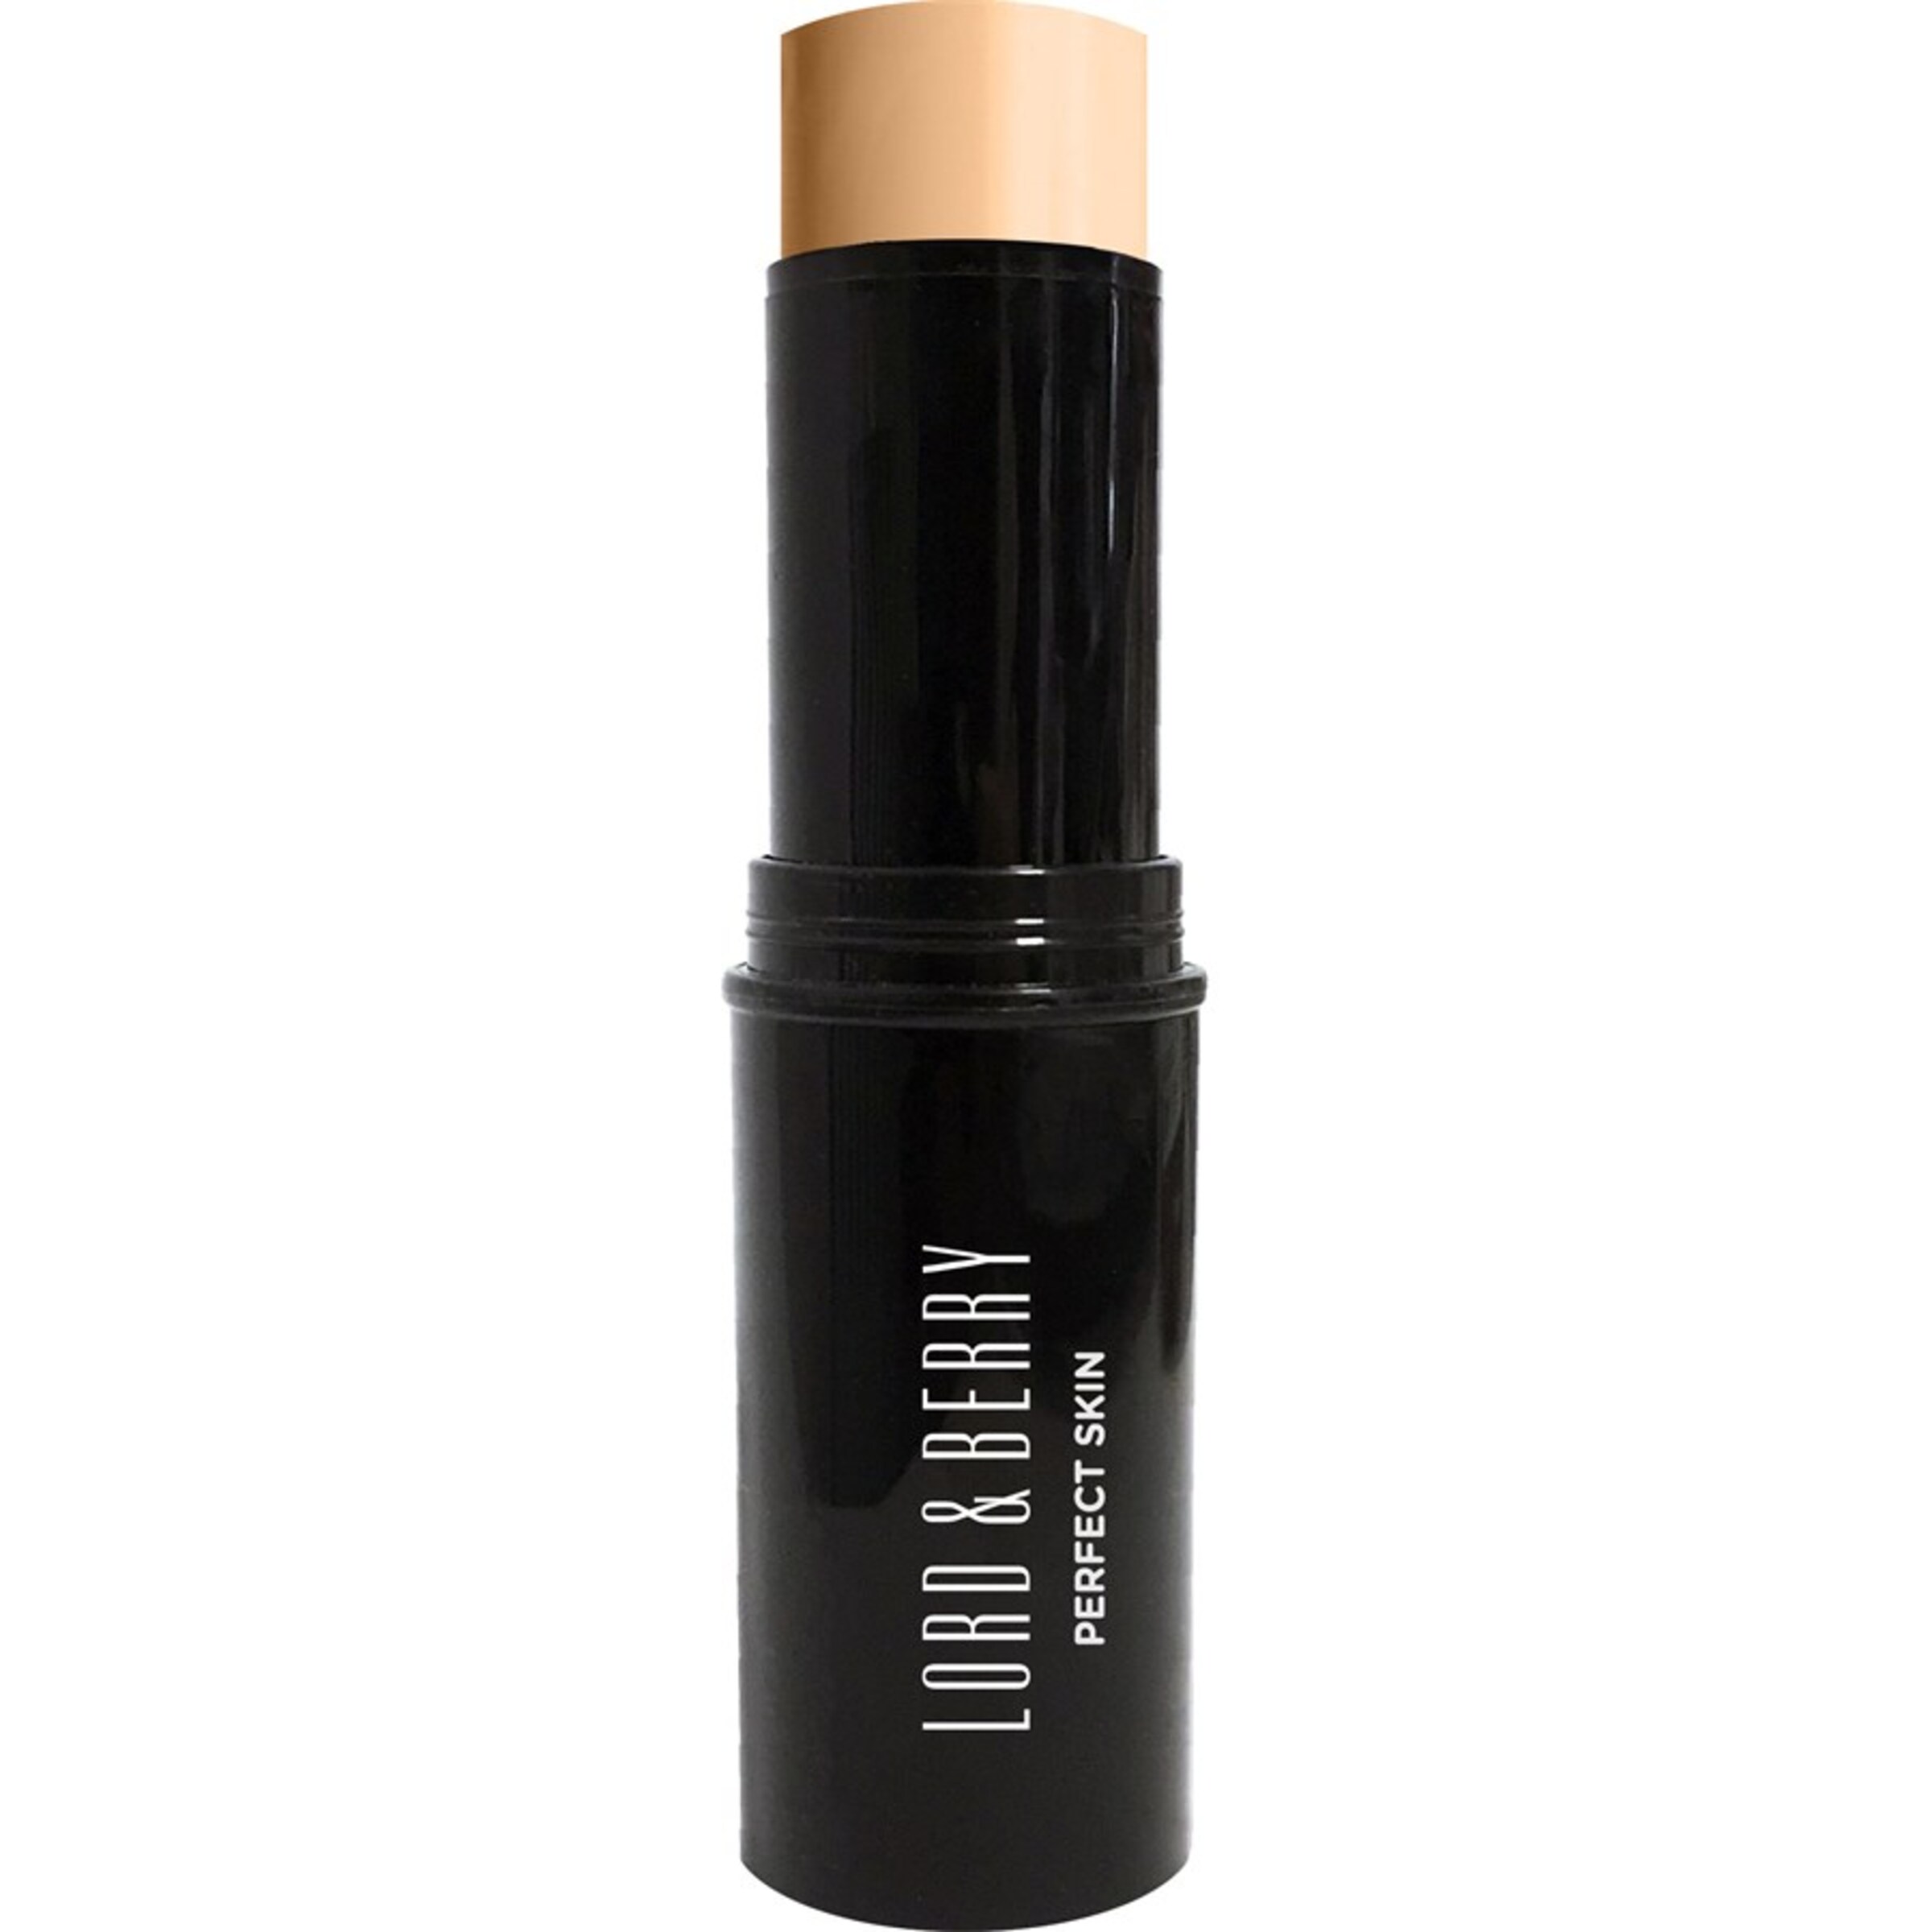 Lord & Berry Foundation Stick Perfect Skin in Beige 